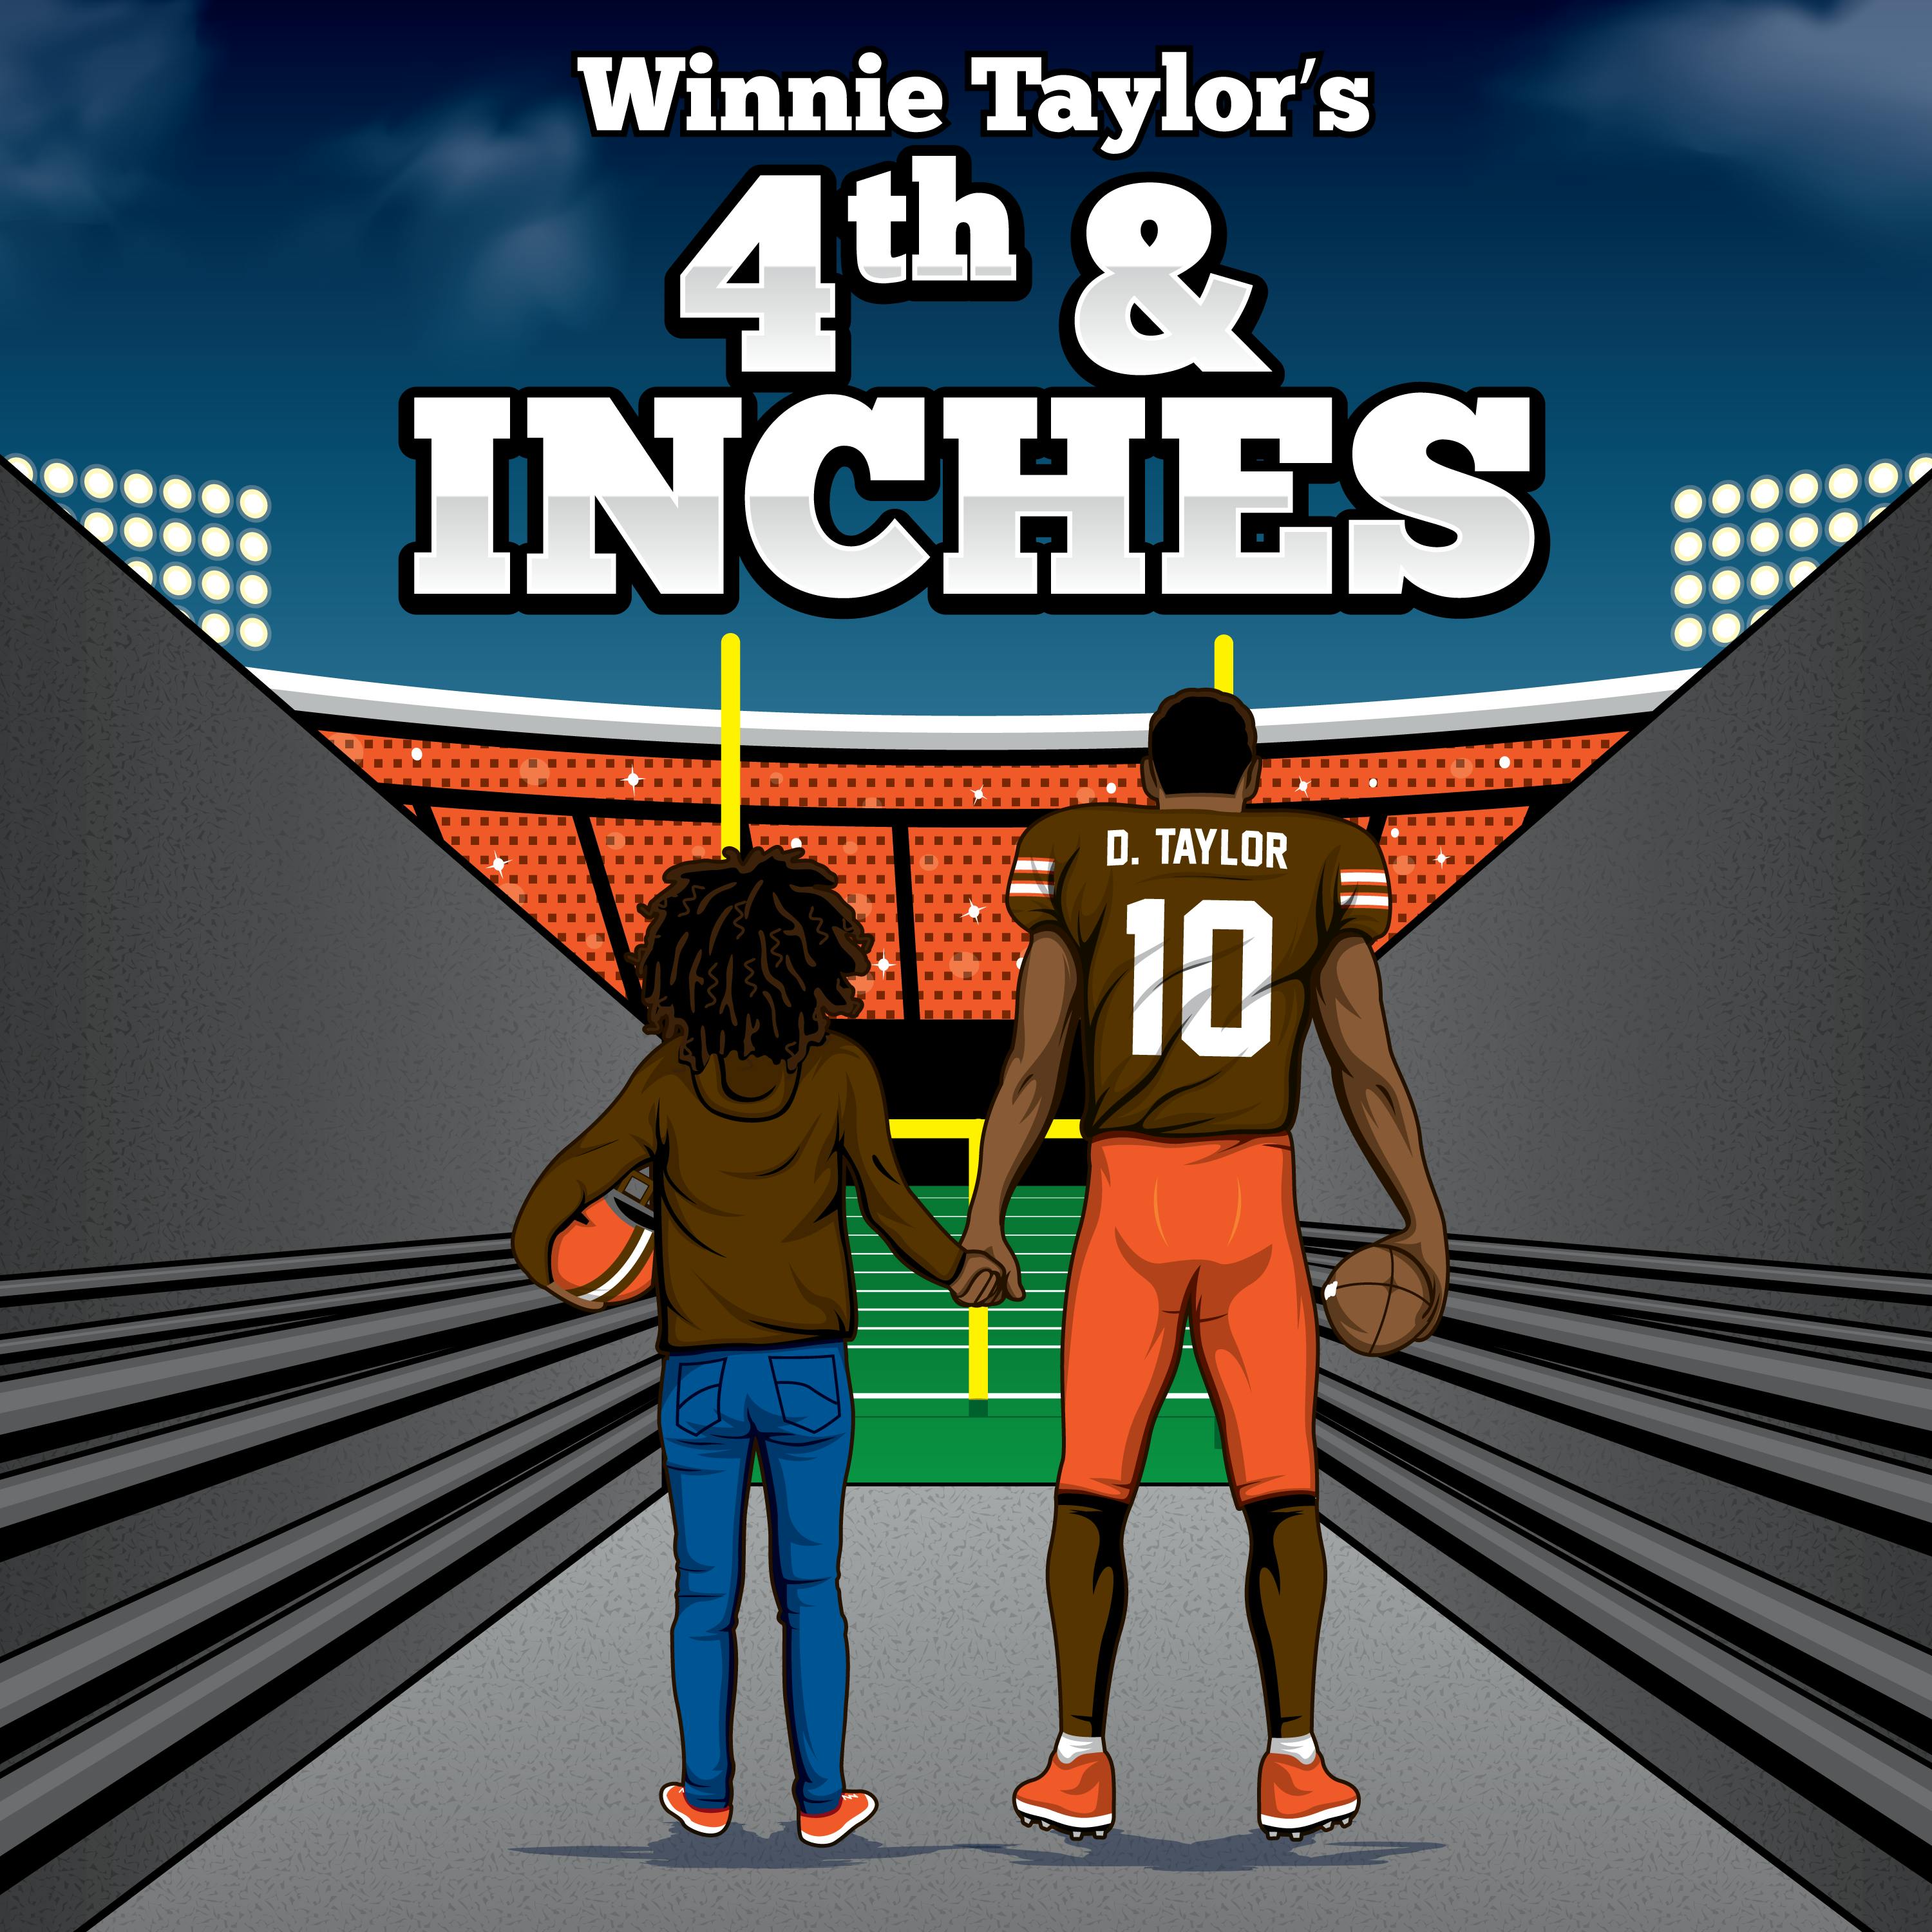 Introducing: Winnie Taylor’s 4th and Inches